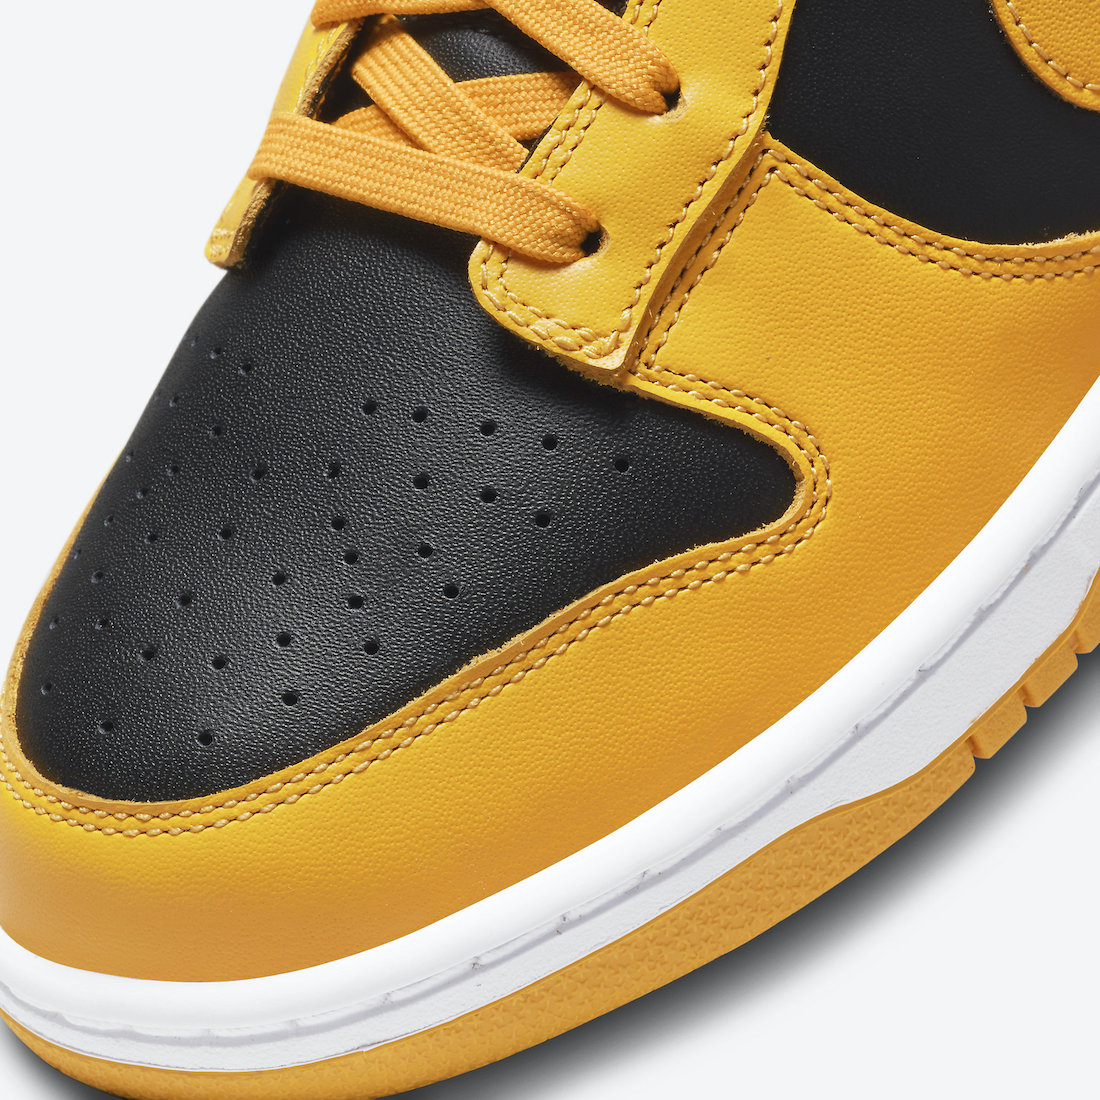 Nike Dunk Low Goldenrod DD1391 004 Release Date Price 6